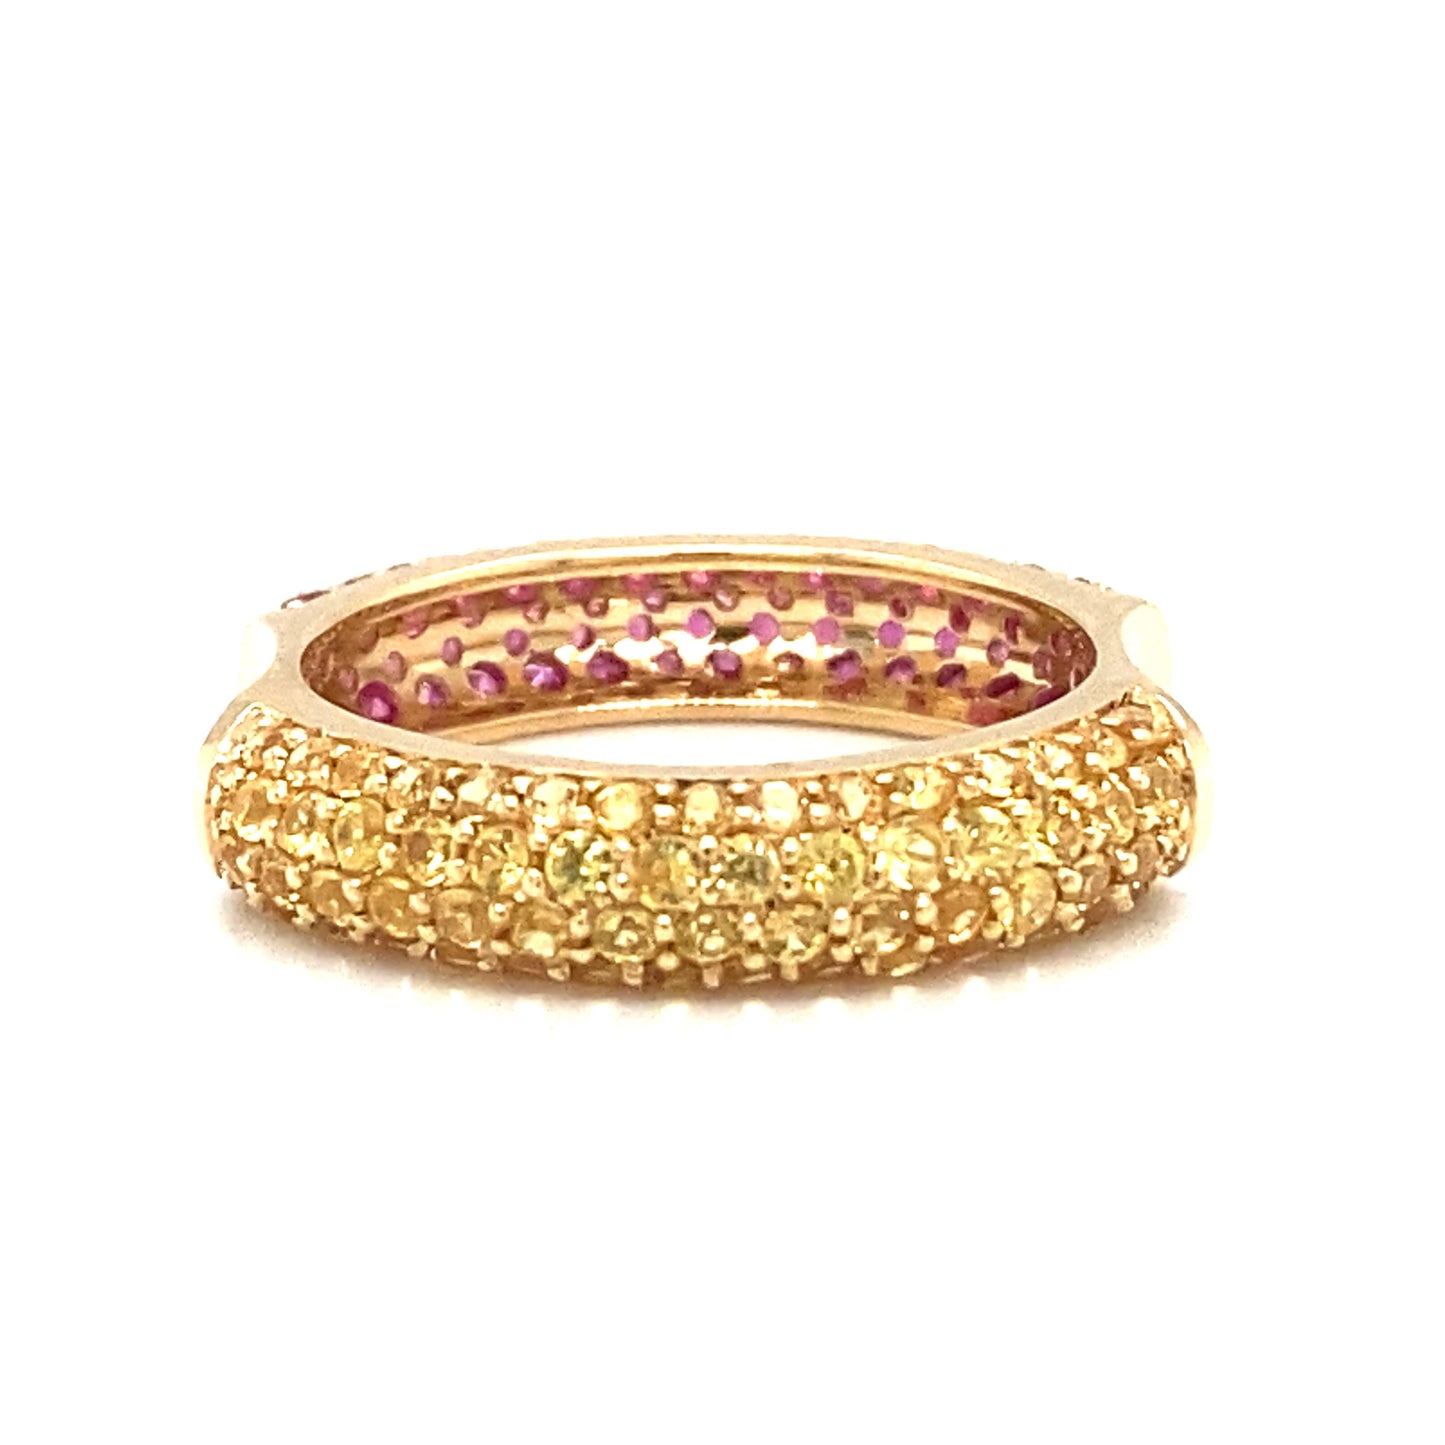 FENDI Couture Reversible Ring with Yellow and Pink Sapphires in 18K Gold